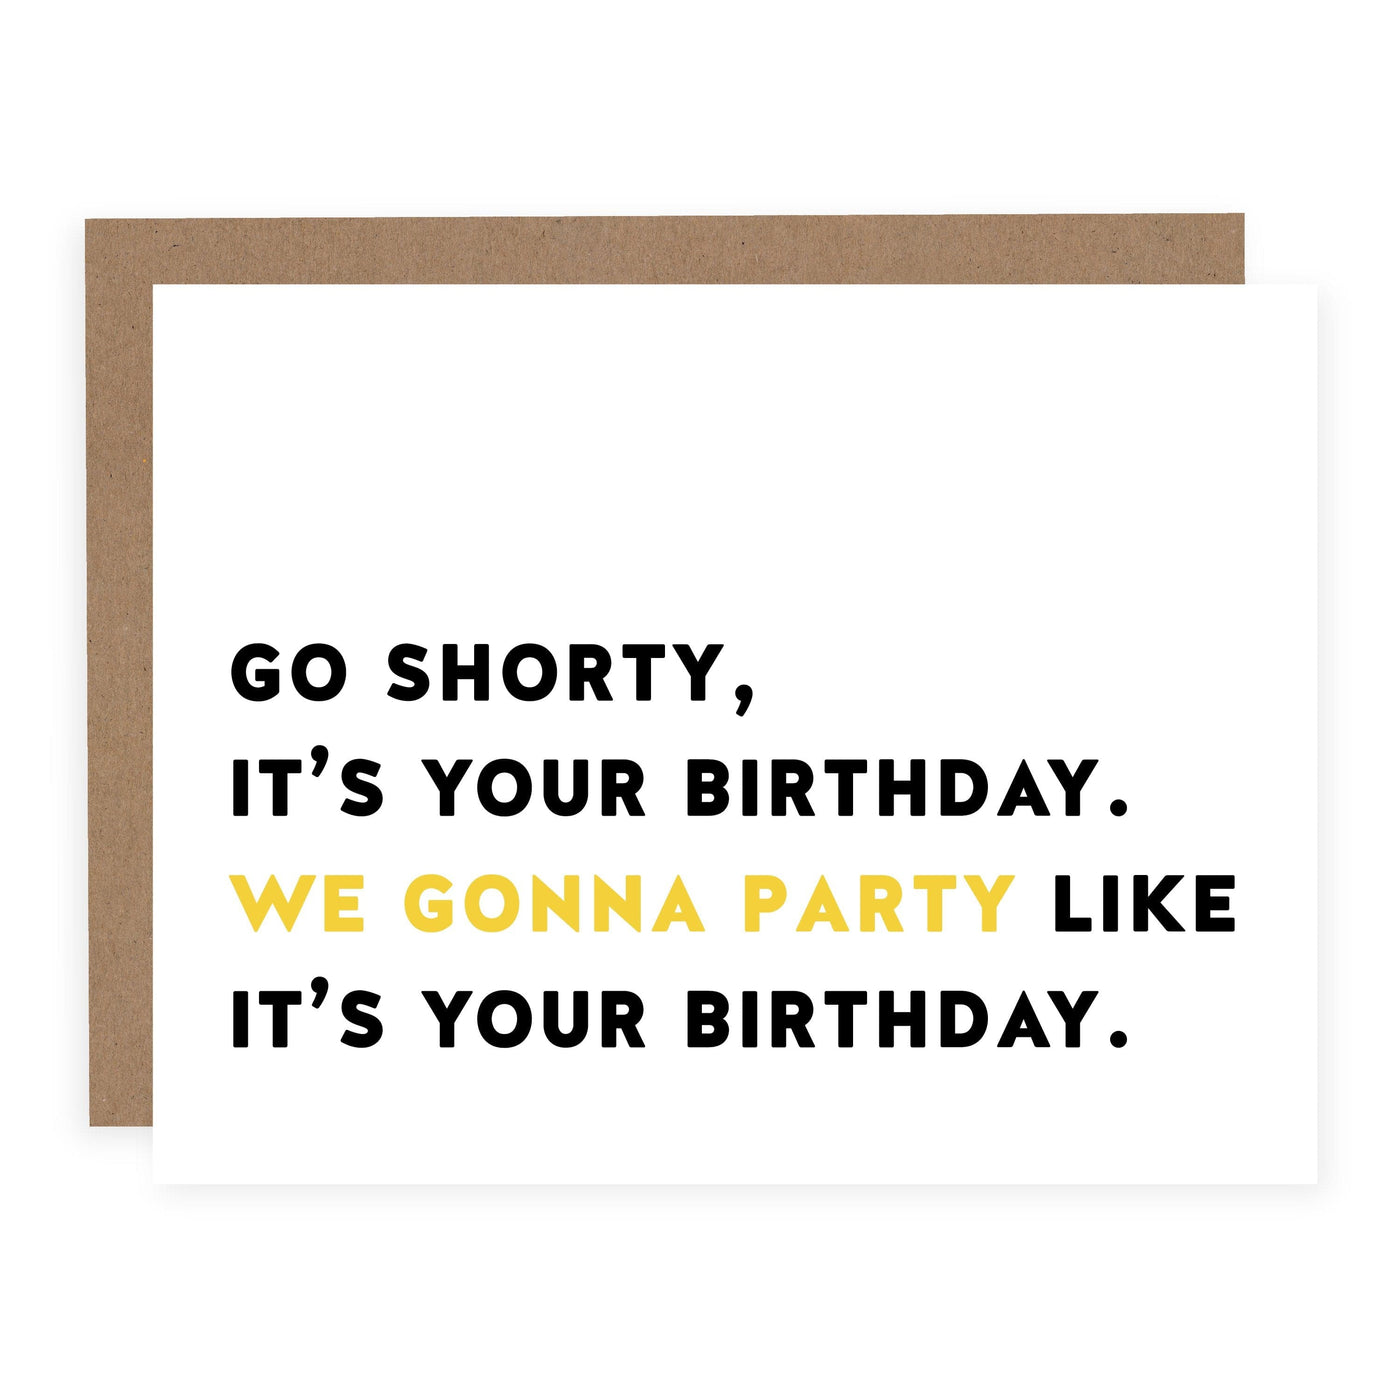 Go Shorty, It's Your Birthday | Greeting Card - The Local Space